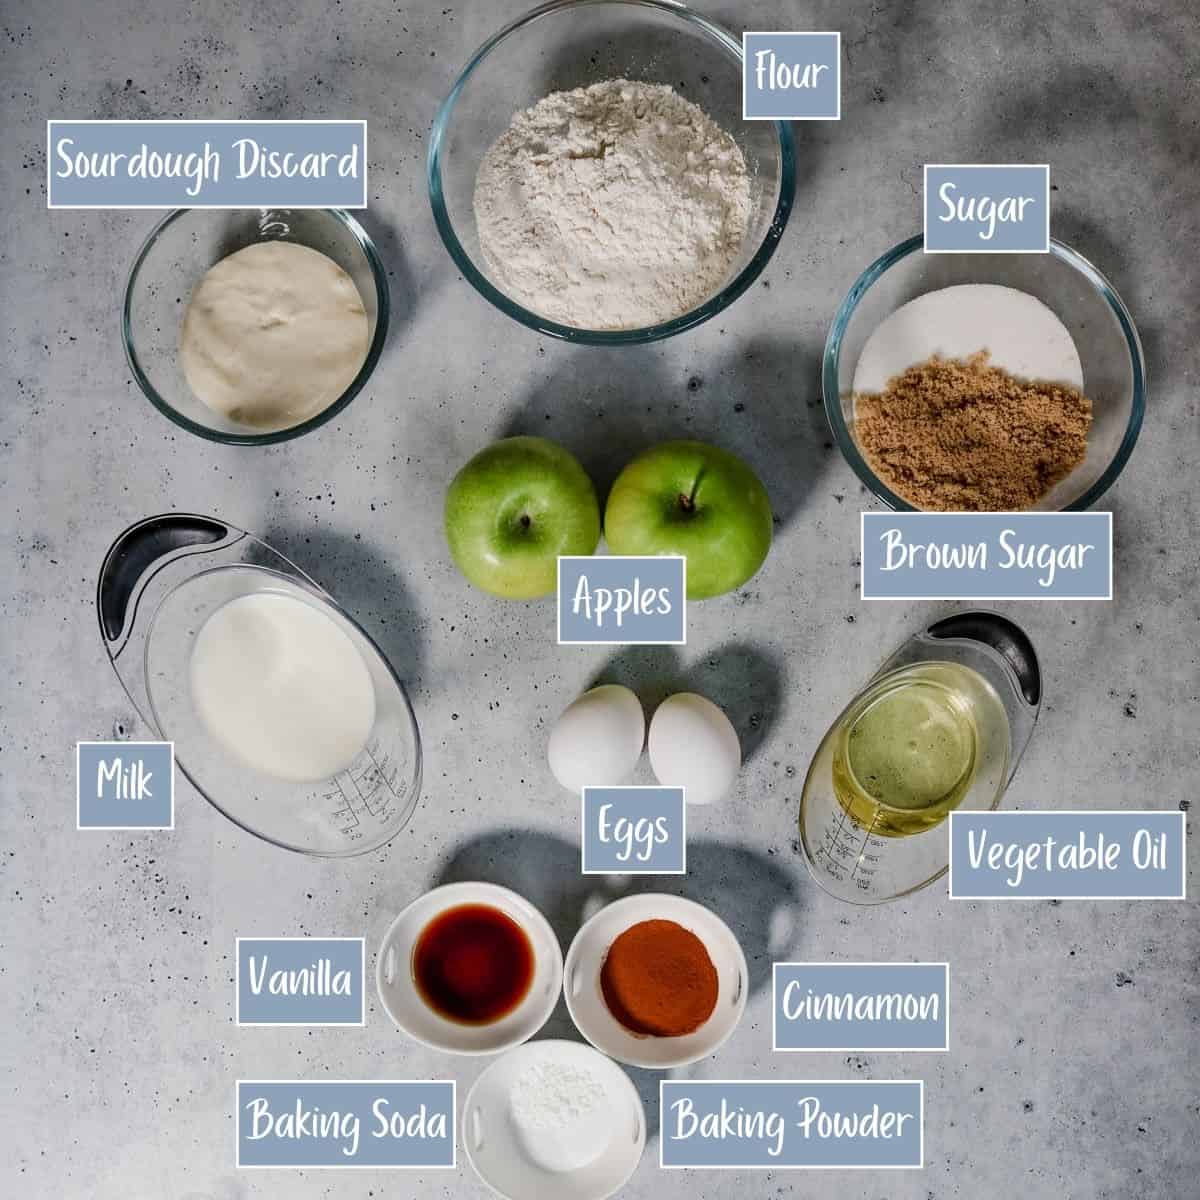 Labeled ingredients for apple sourdough muffins.